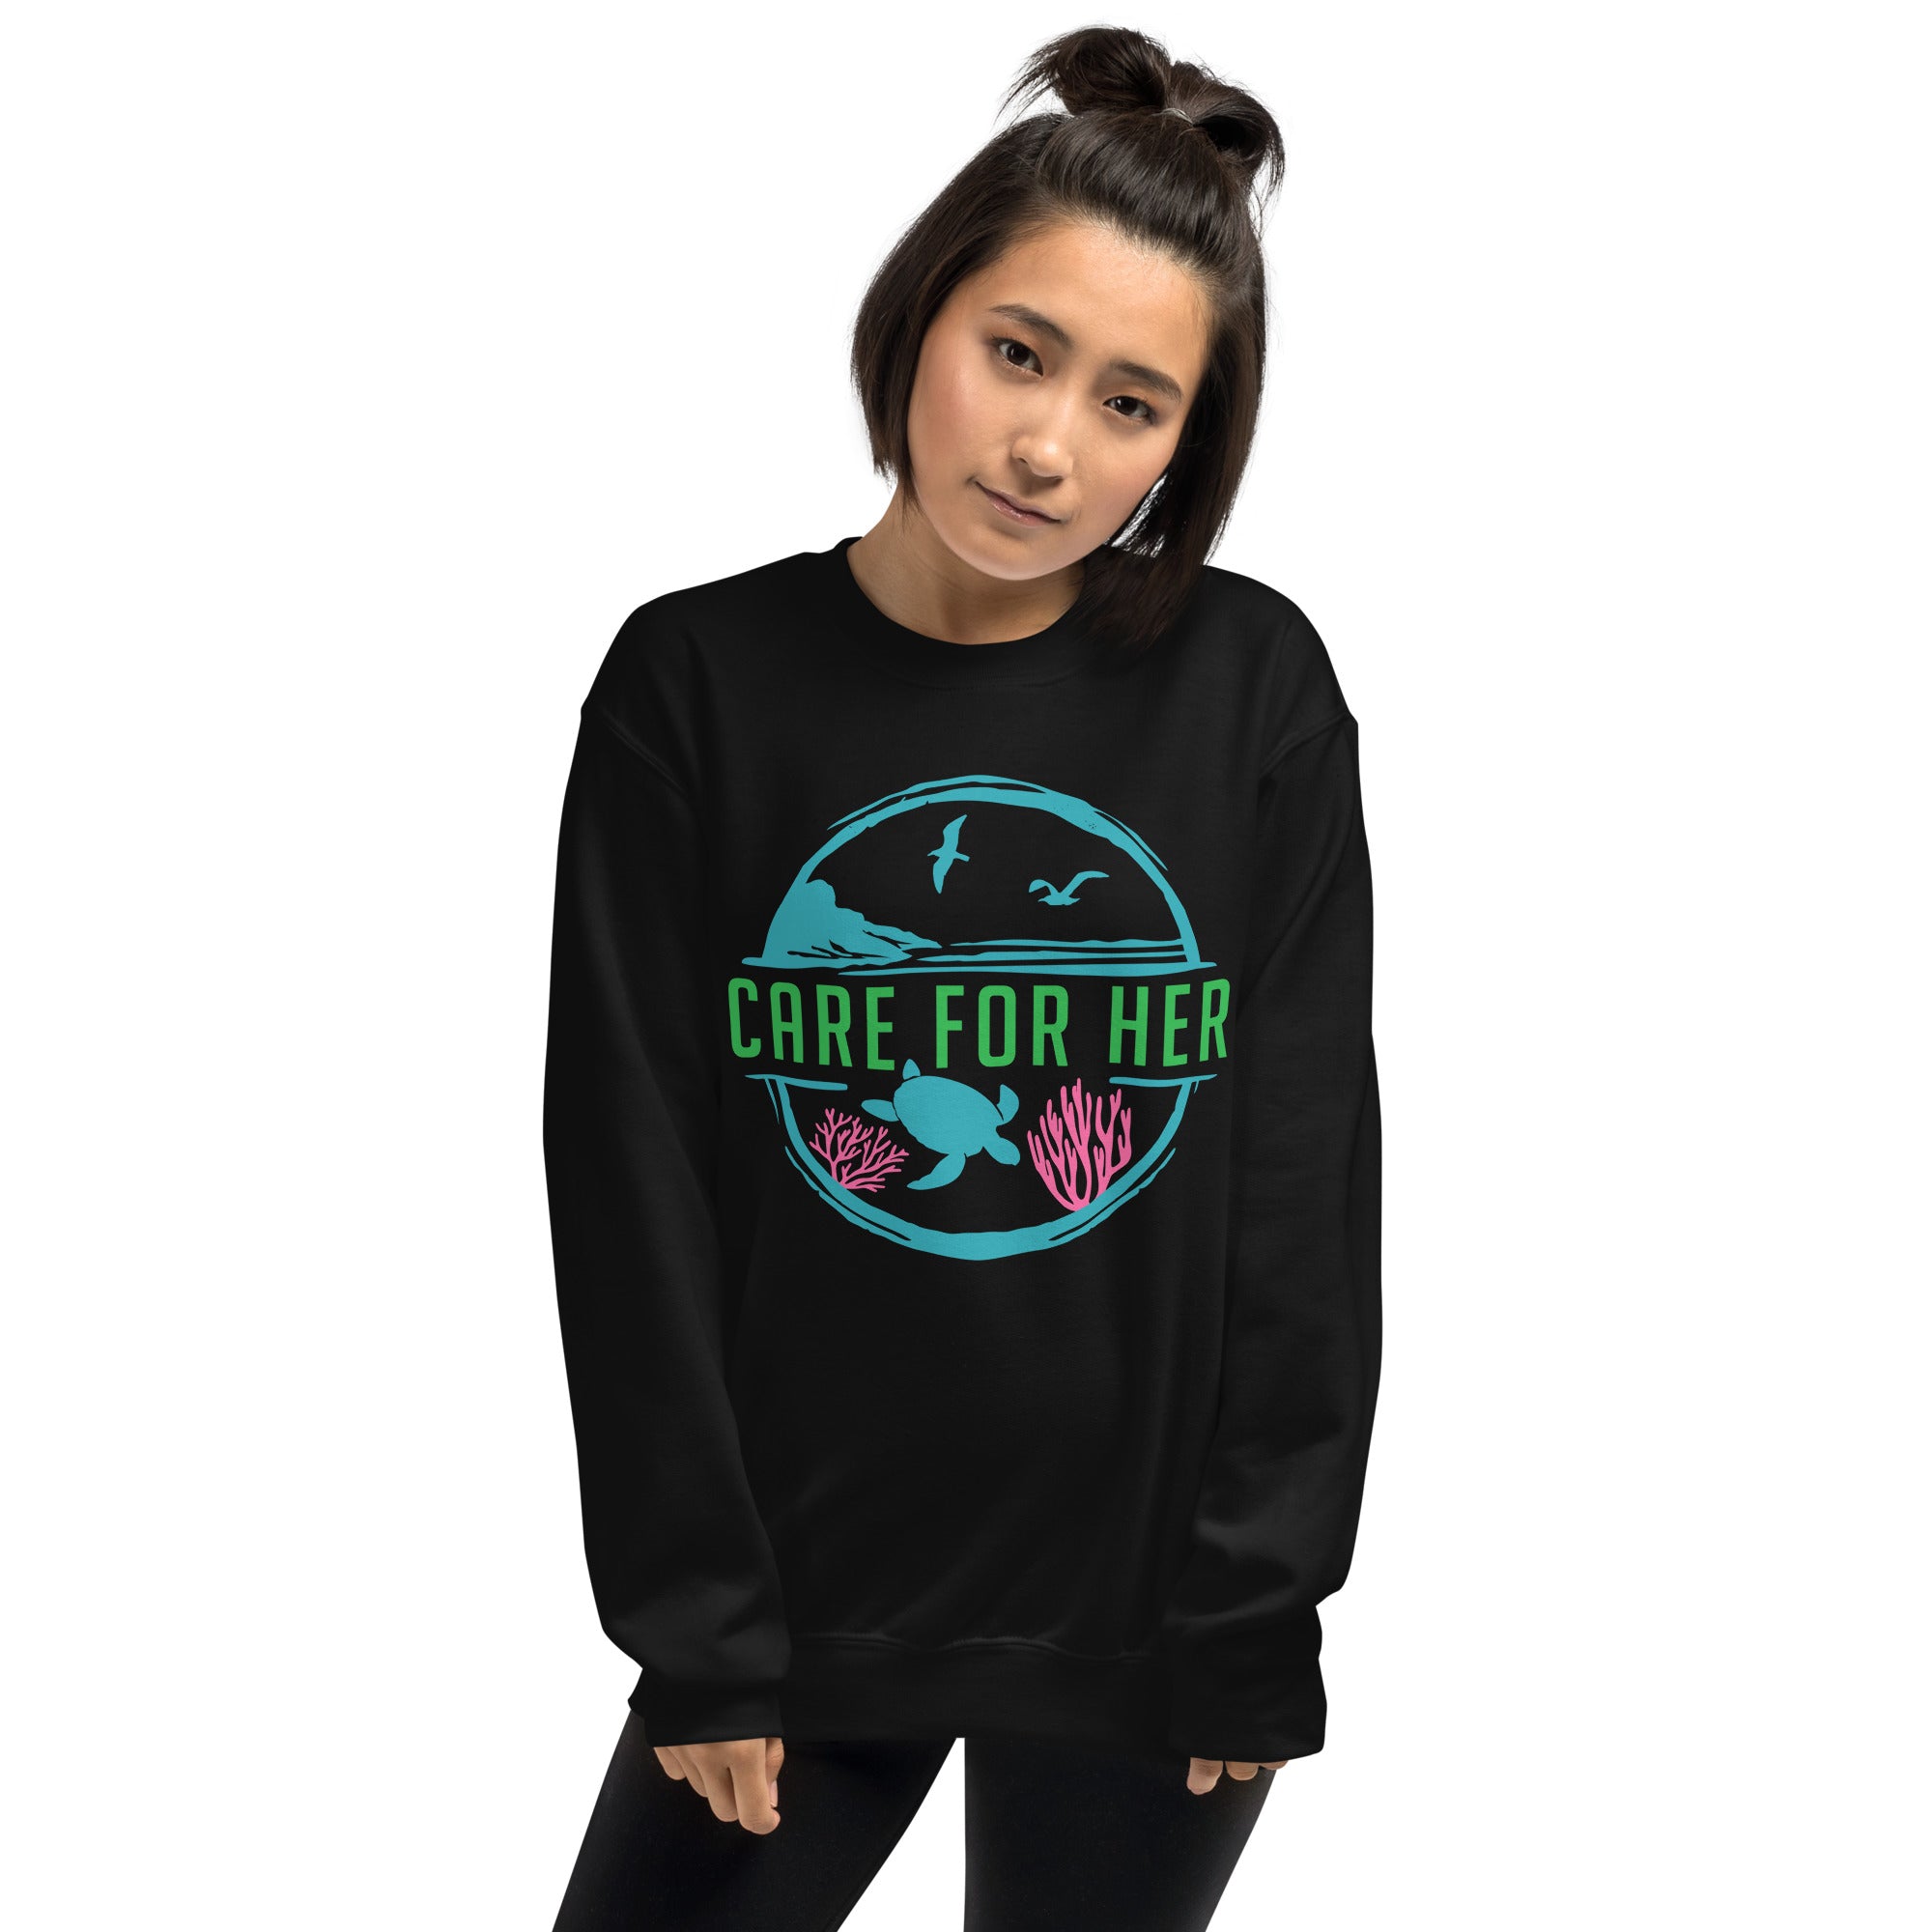 Care For Planet Earth Against Climate Change Adult Crewneck Sweatshirt